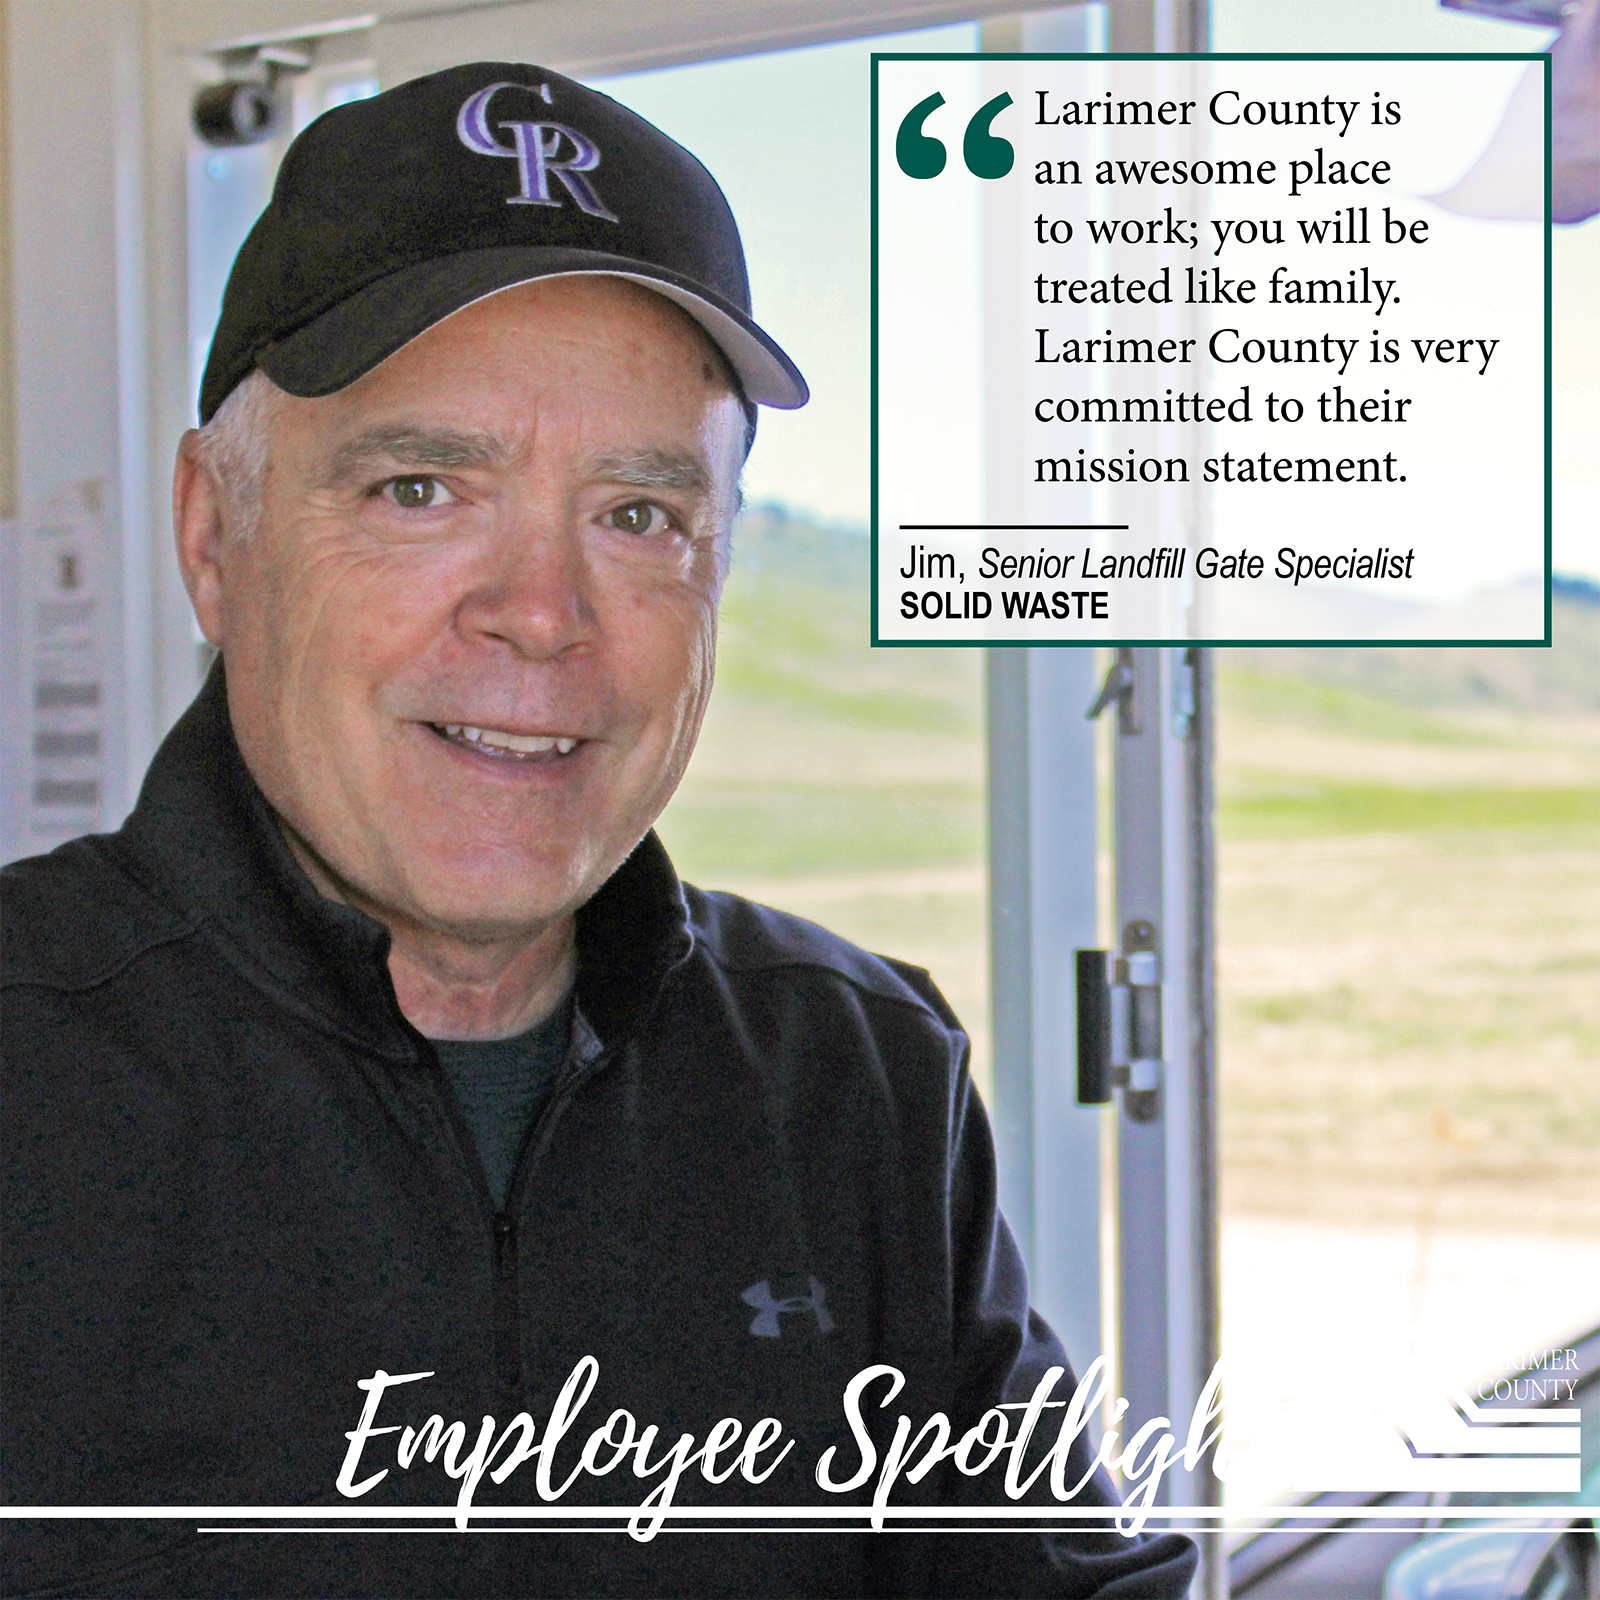 Image 19: "The Solid Waste department is an awesome place to work; everyone is treated like family. Larimer County is very committed to their mission statement."